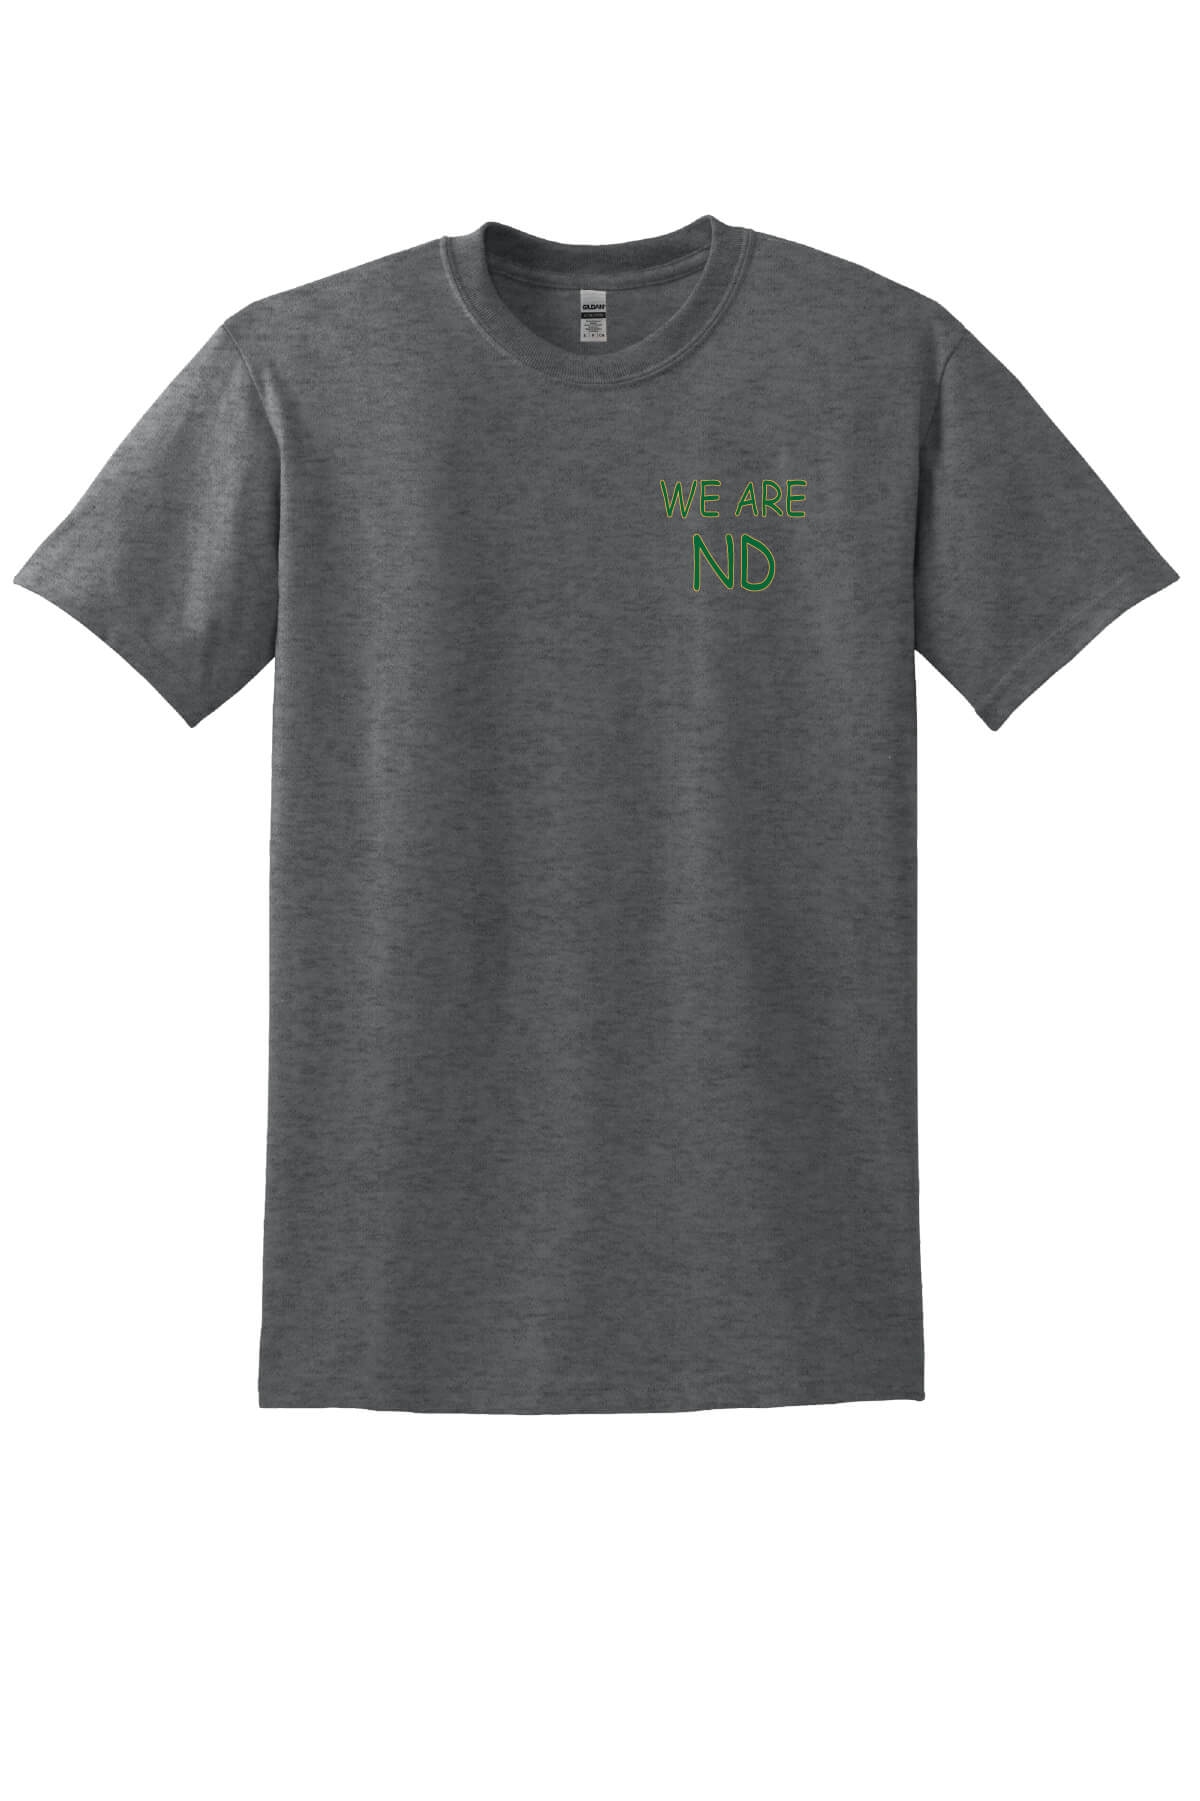 We Are ND Short Sleeve T-Shirt gray